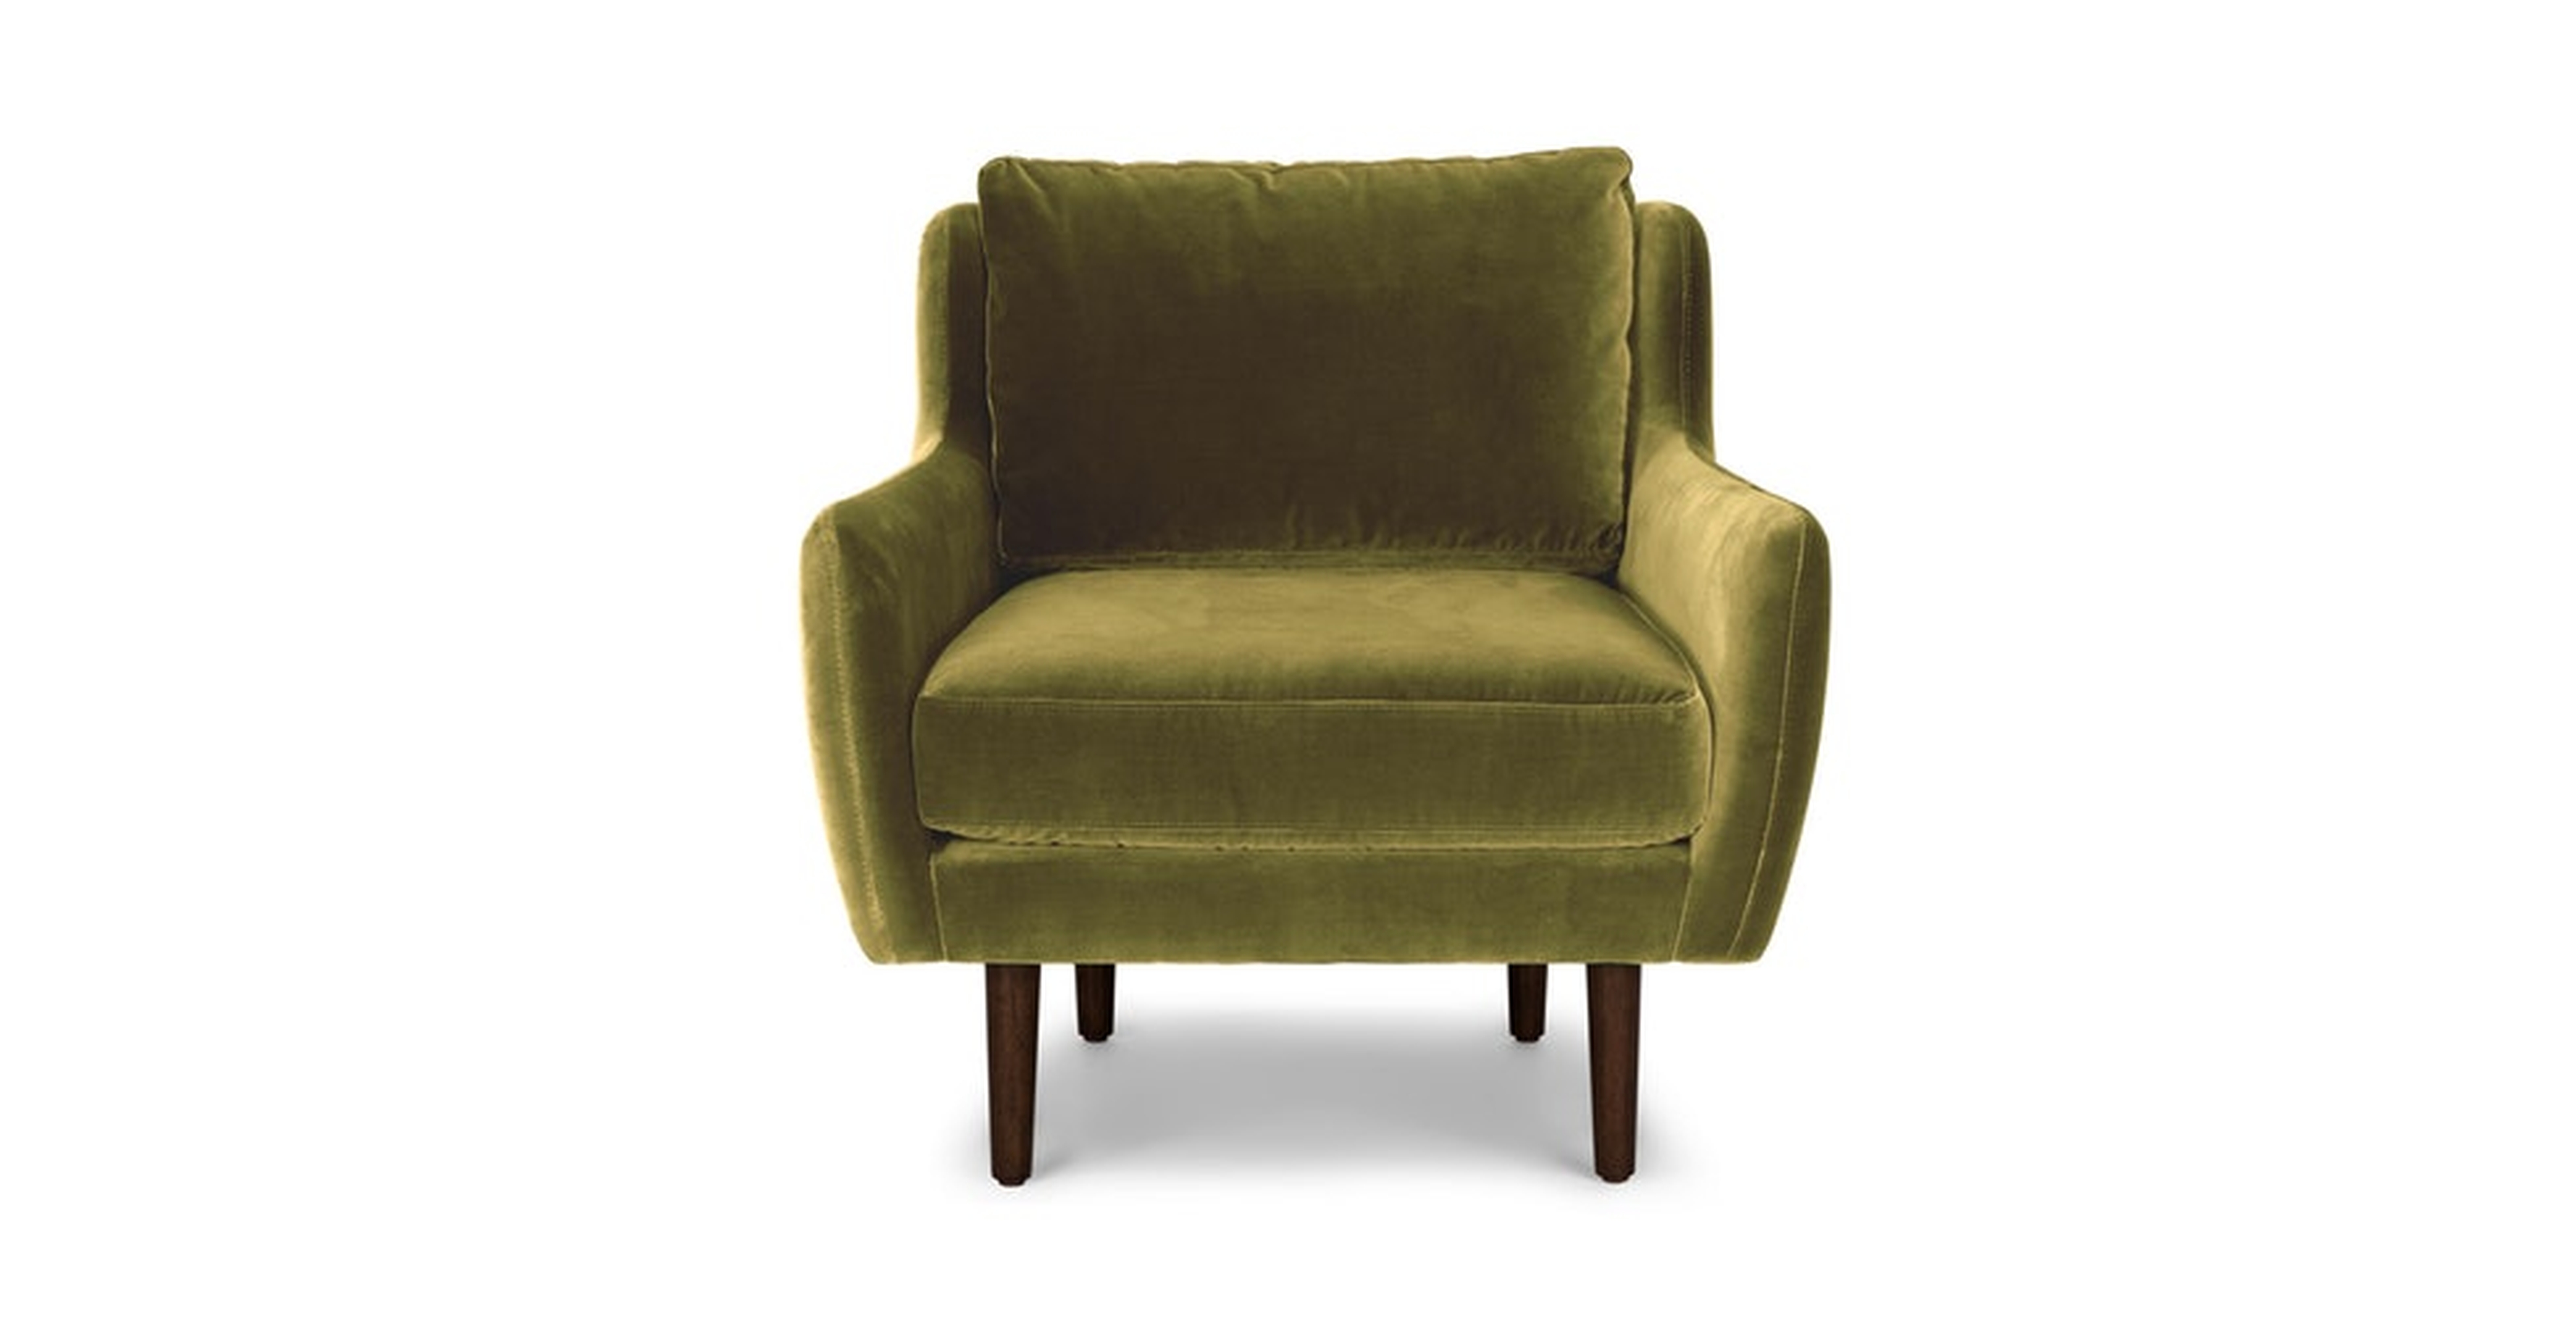 Matrix Olive Green Chair - Article